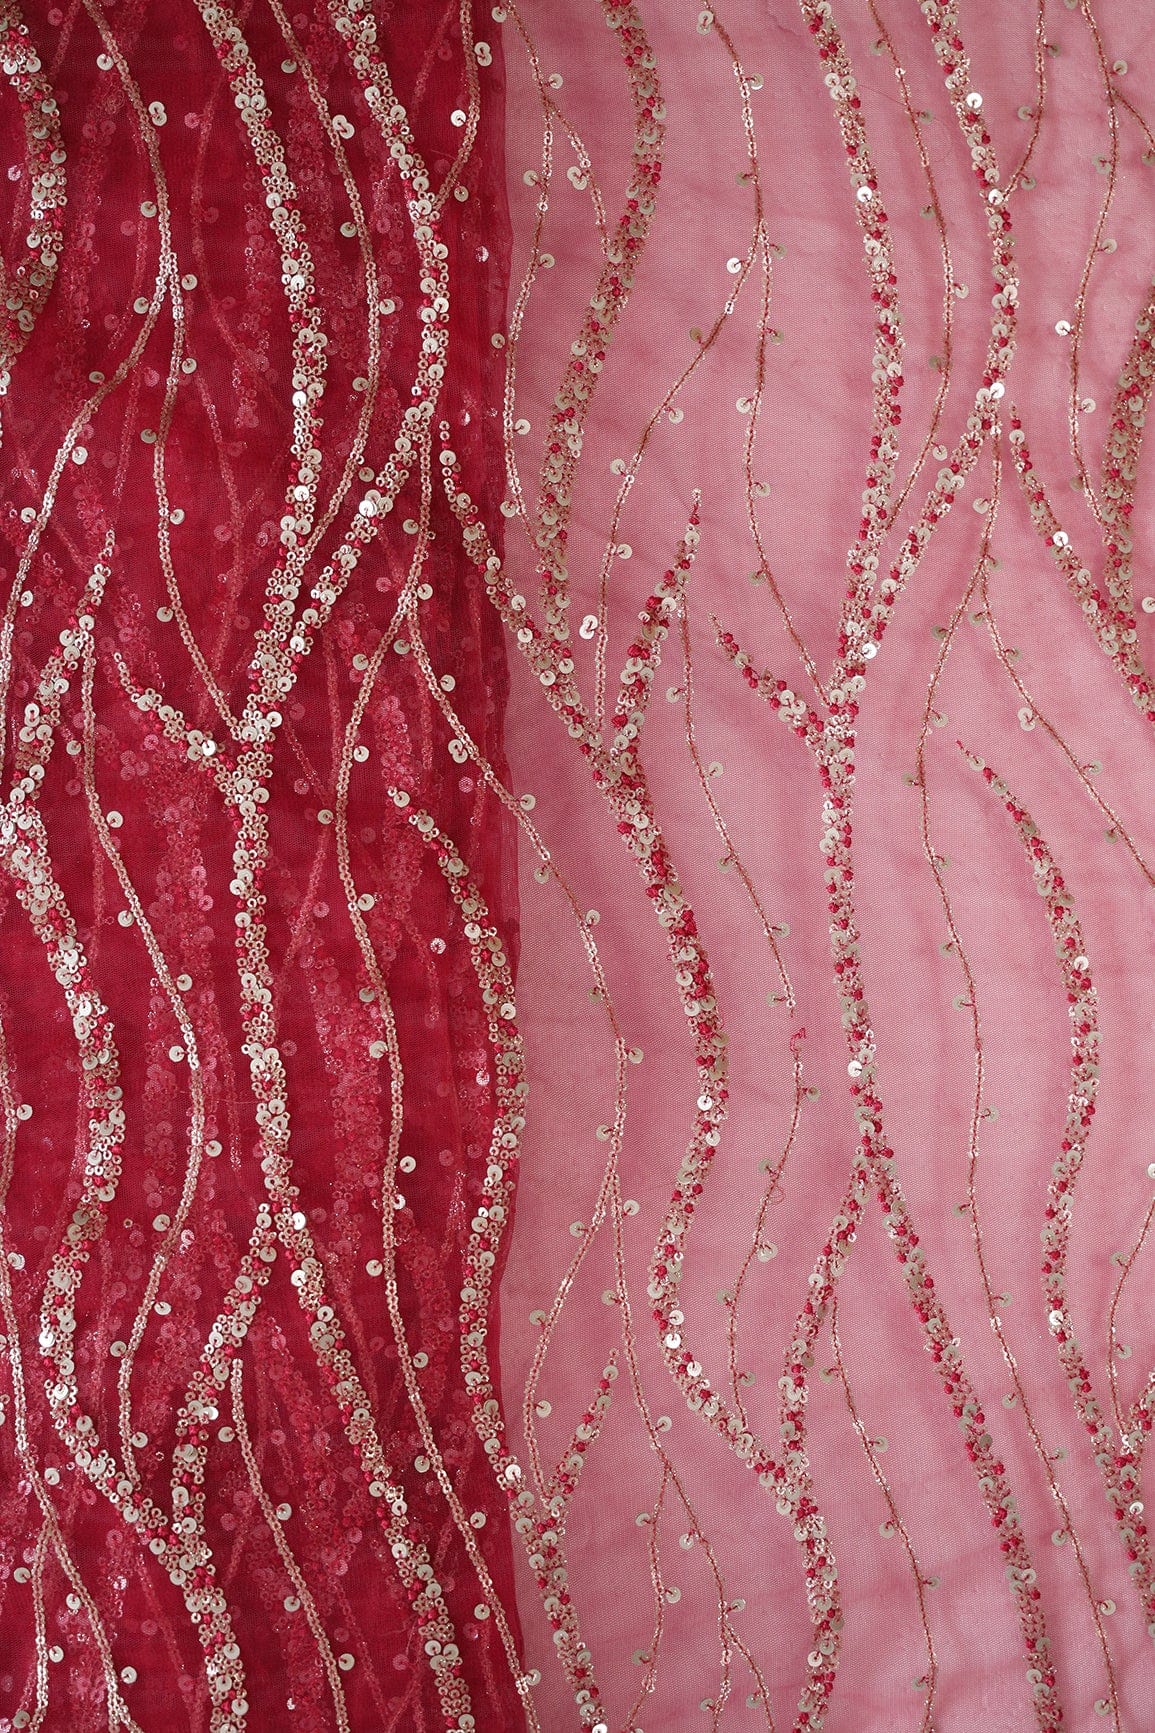 doeraa Embroidery Fabrics Gold And Silver Sequins With Blue Thread Wavy Embroidery Work On Cherry Red Soft Net Fabric